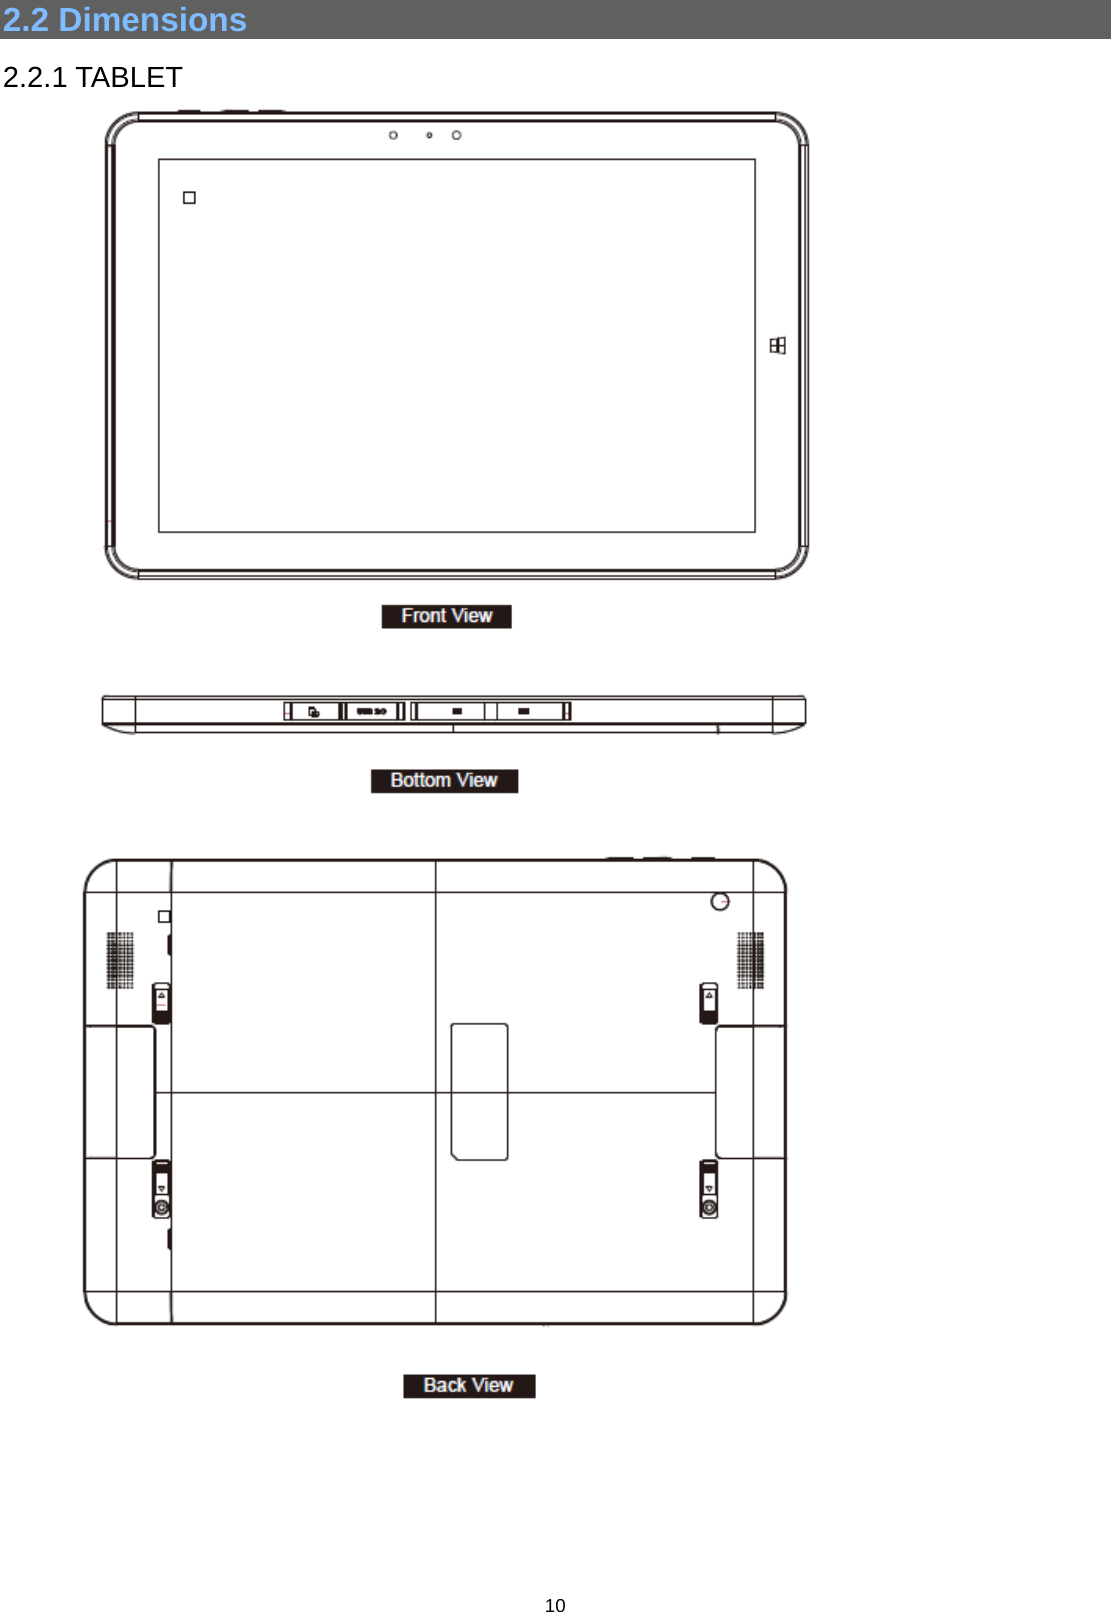  10  2.2 Dimensions  2.2.1 TABLET                       